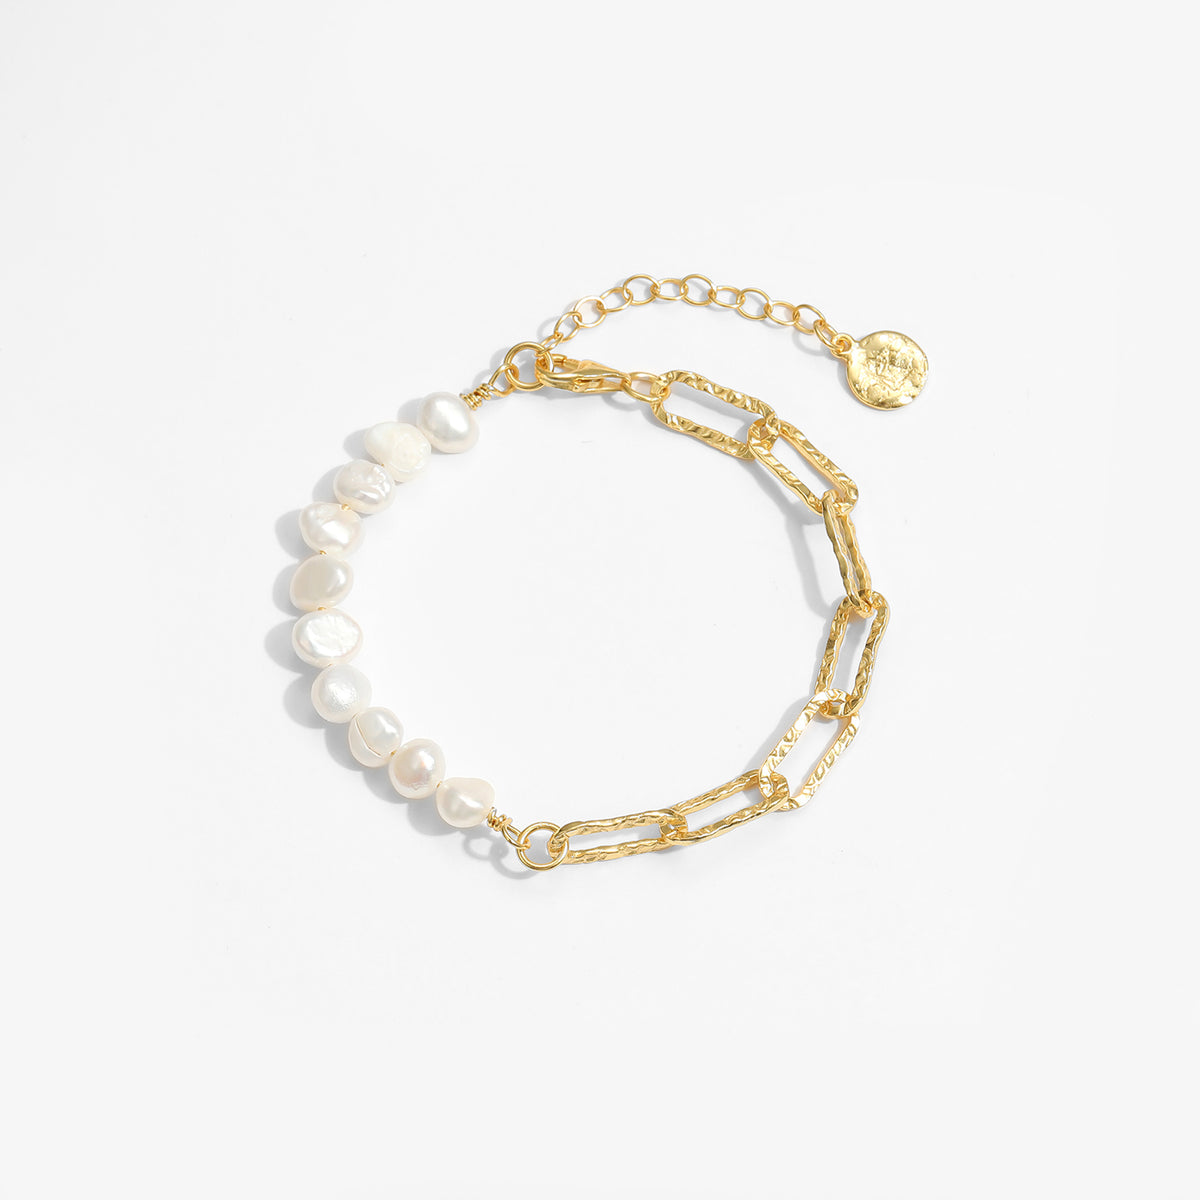 Girl Irregular Hollow Chain Natural Pearl Bracelet - Gold-Plated Silver Pearl Bracelet for women - Perfect Pearl Bracelet with Gift Wrapping Included